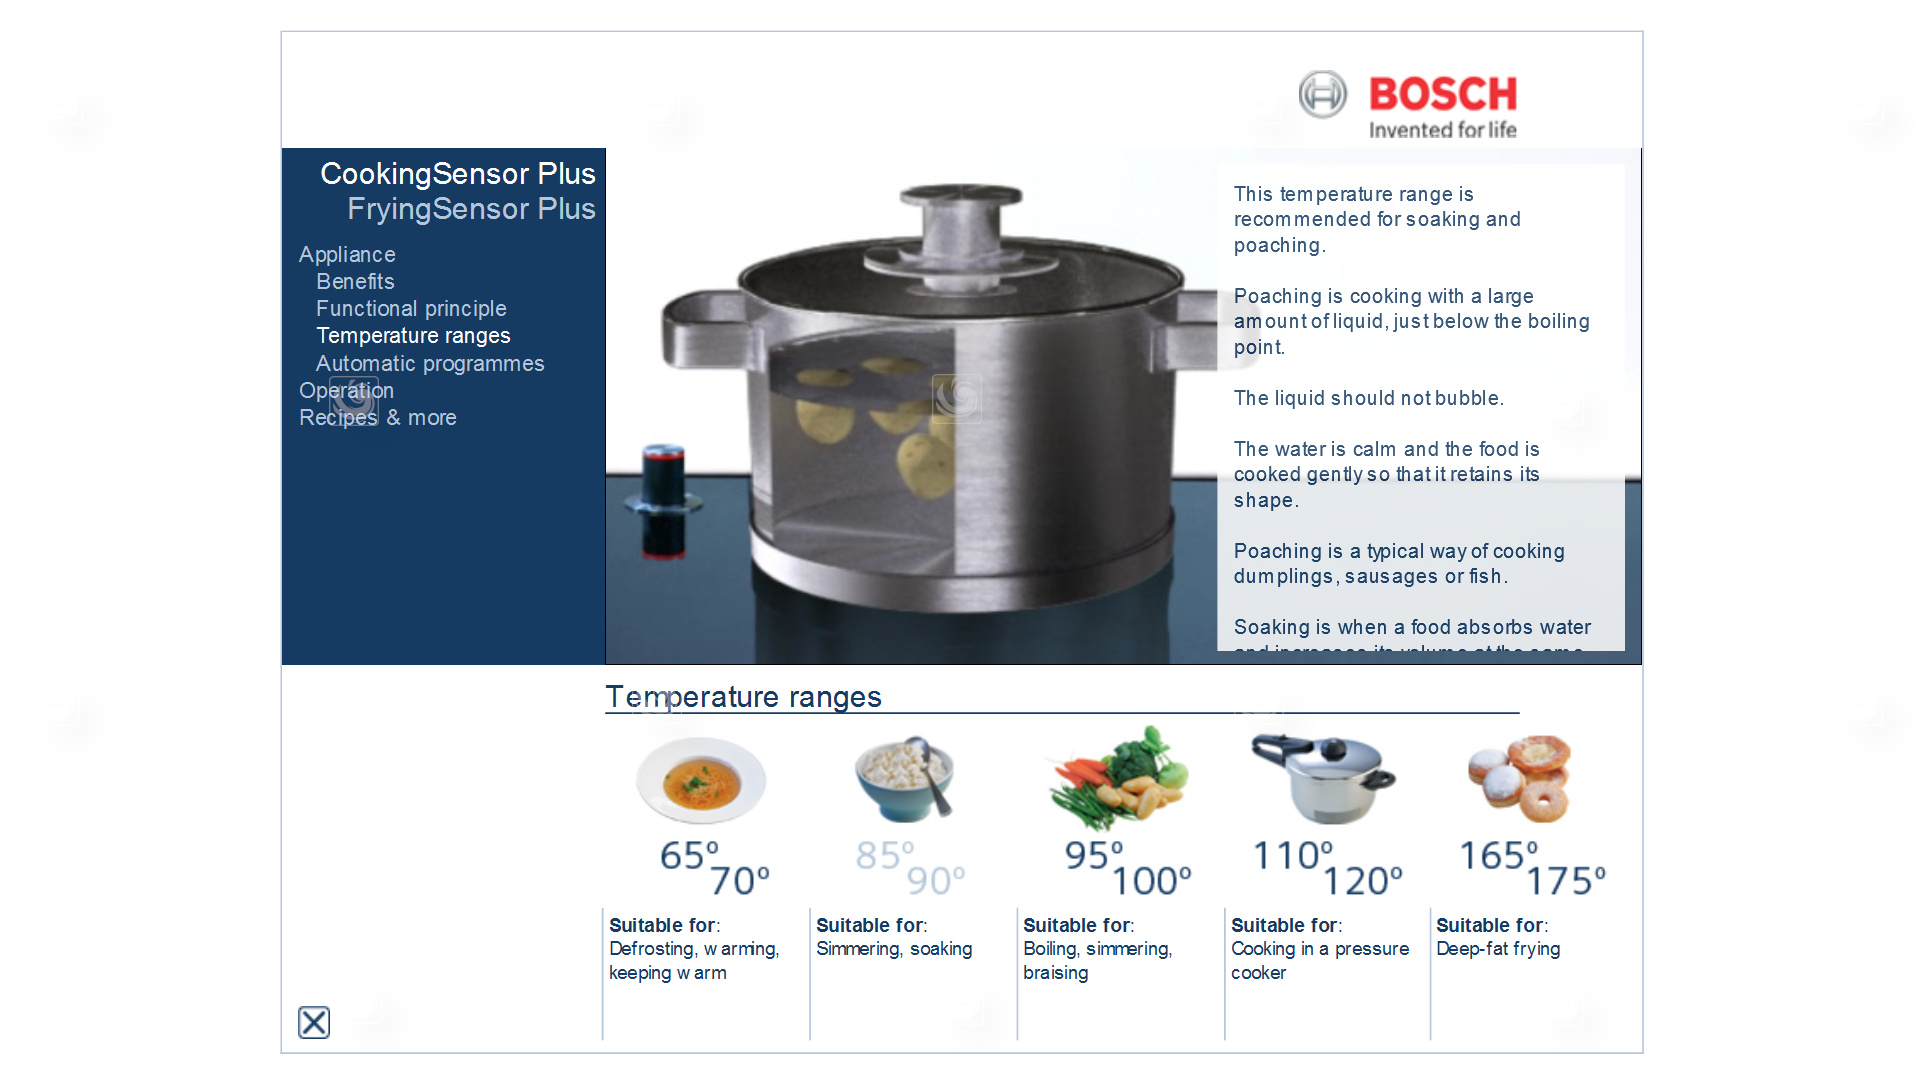 Bosch's web application screenshot showing different temperatures of its induction cooktops